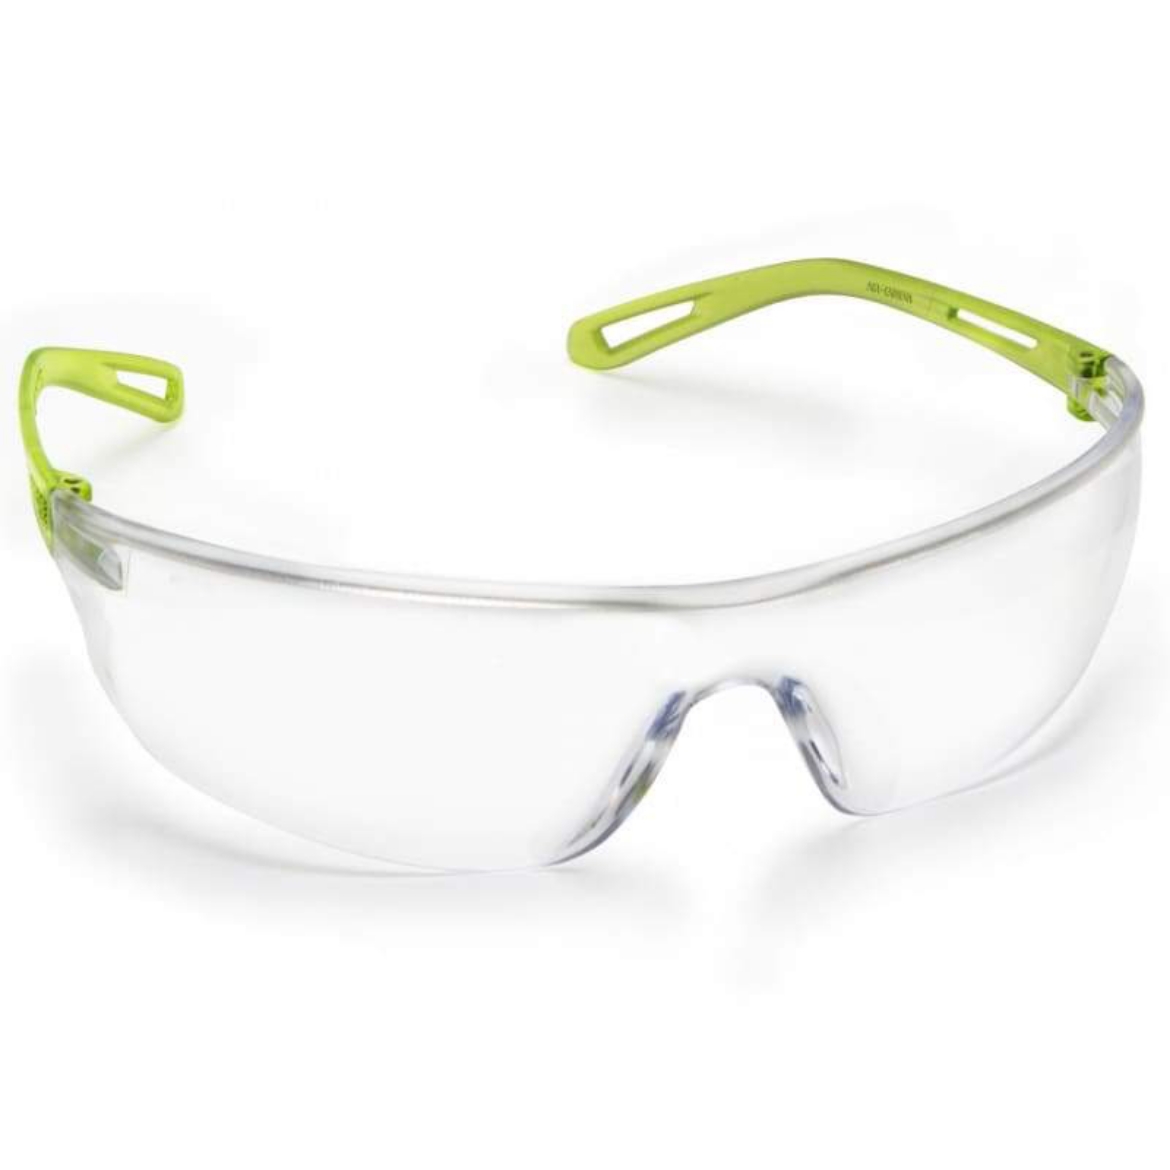 Picture of Force360 Air Clear Anti-Reflective Lens Safety Glasses